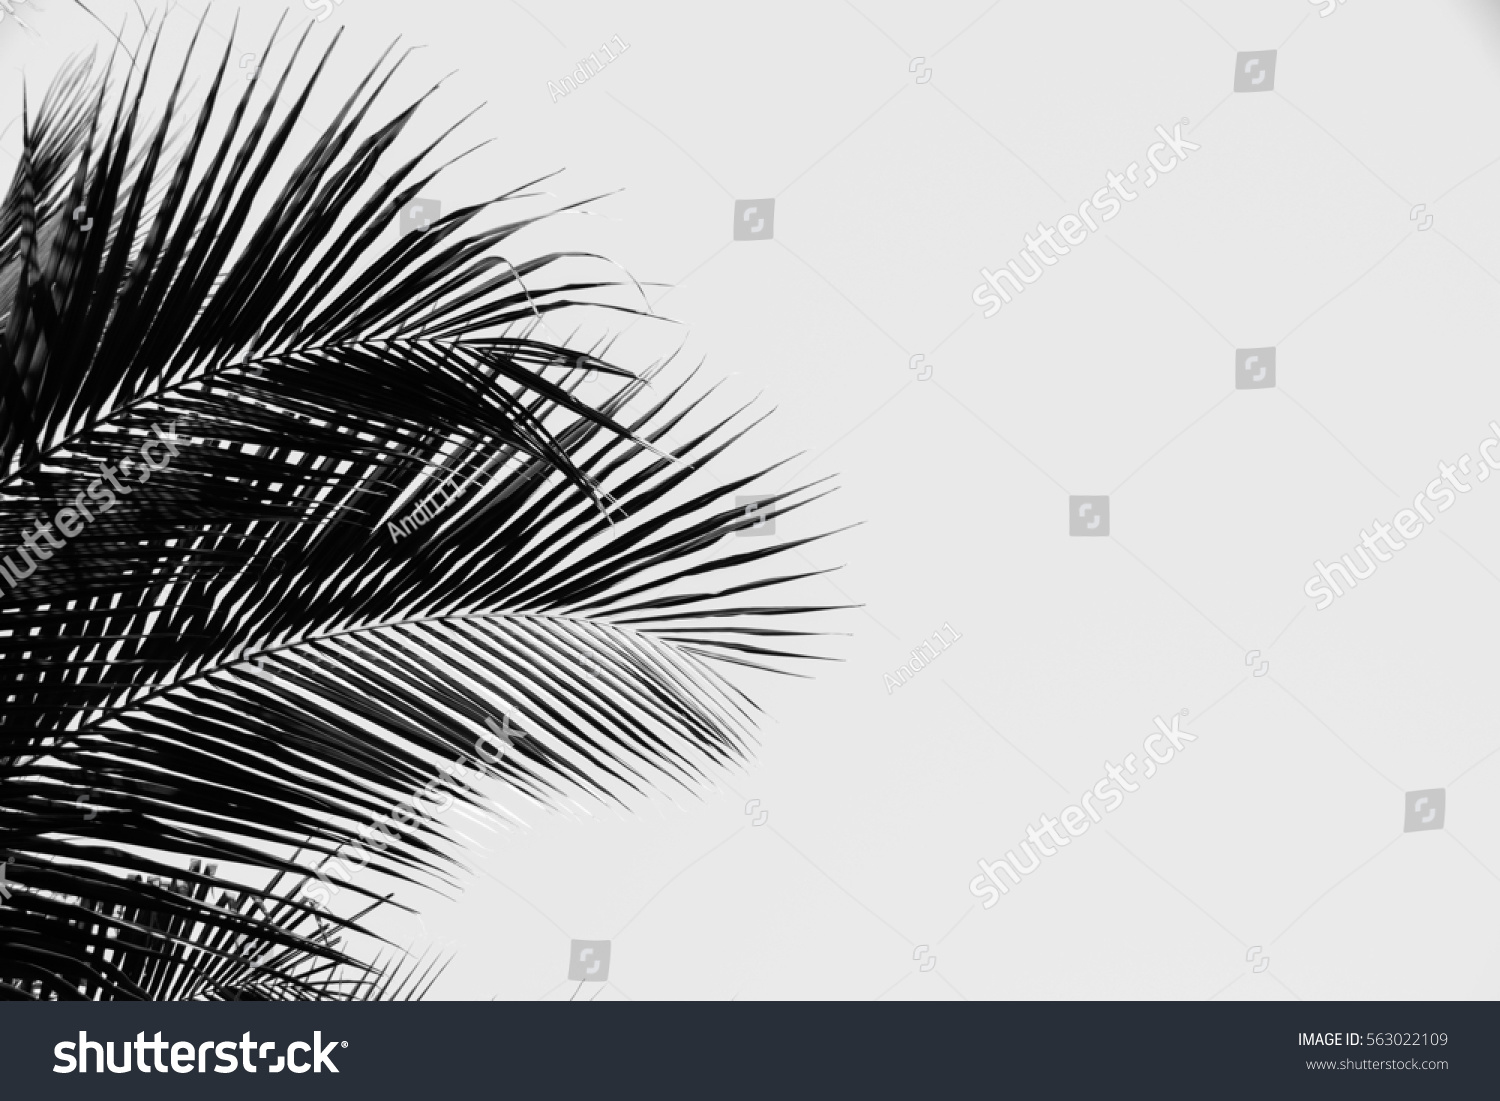 Contrasting black and white image palm tree against white background #563022109